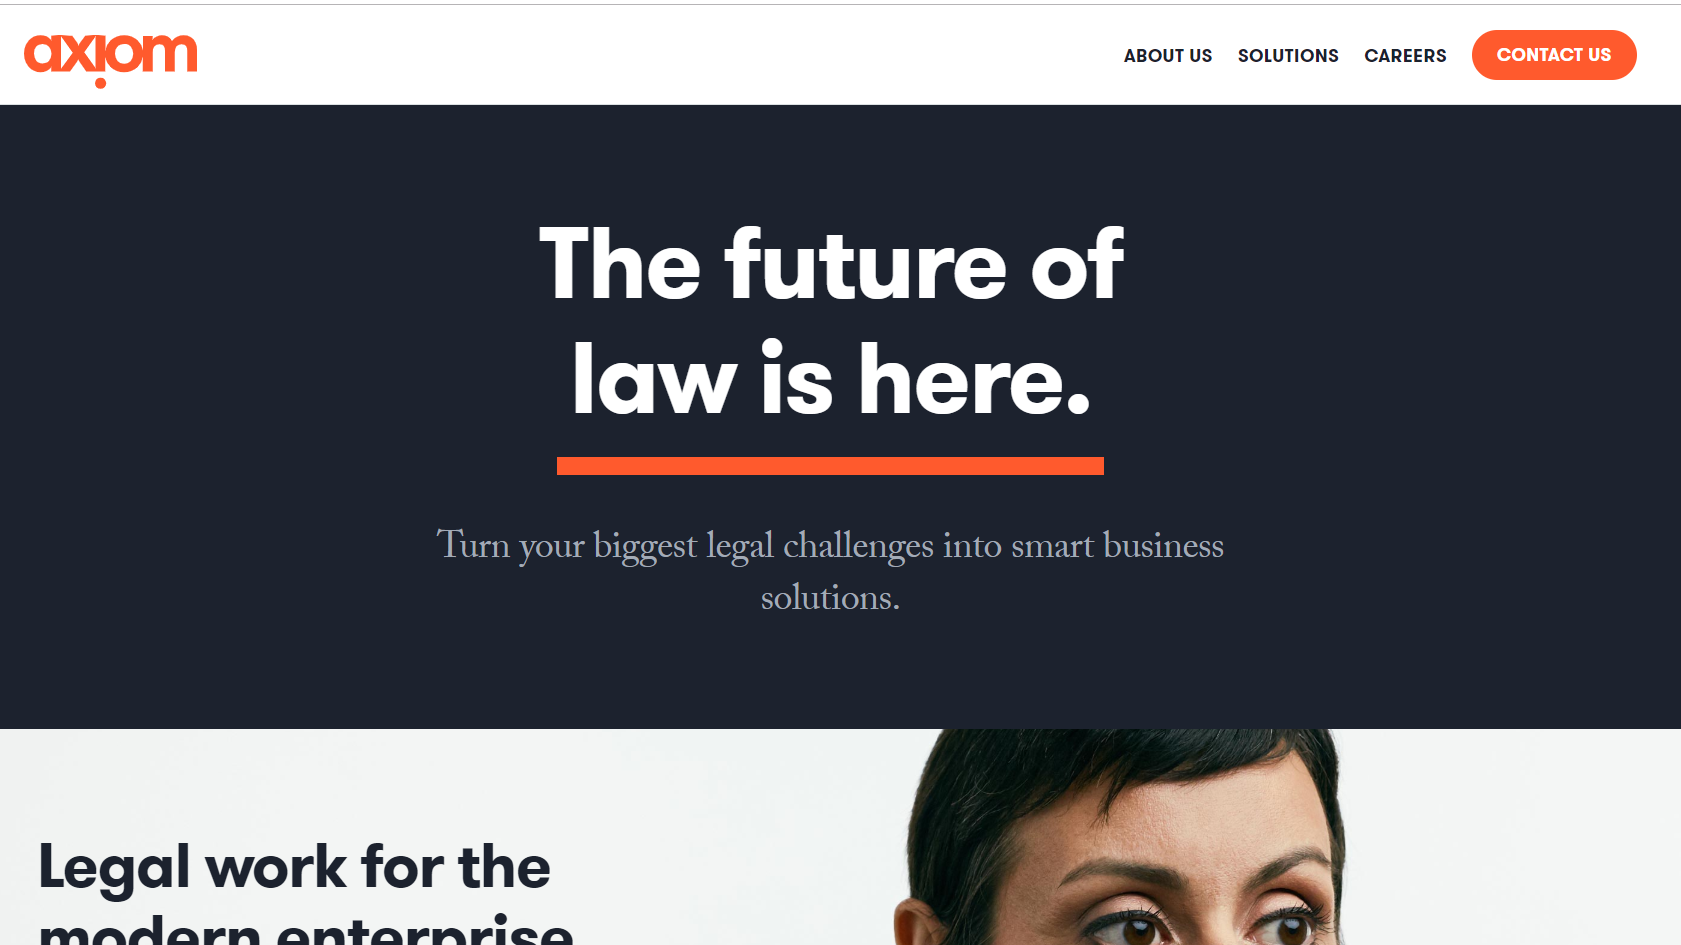 Alternative Legal Service Company Axiom Prepares for IPO; Spins Off Two Companies